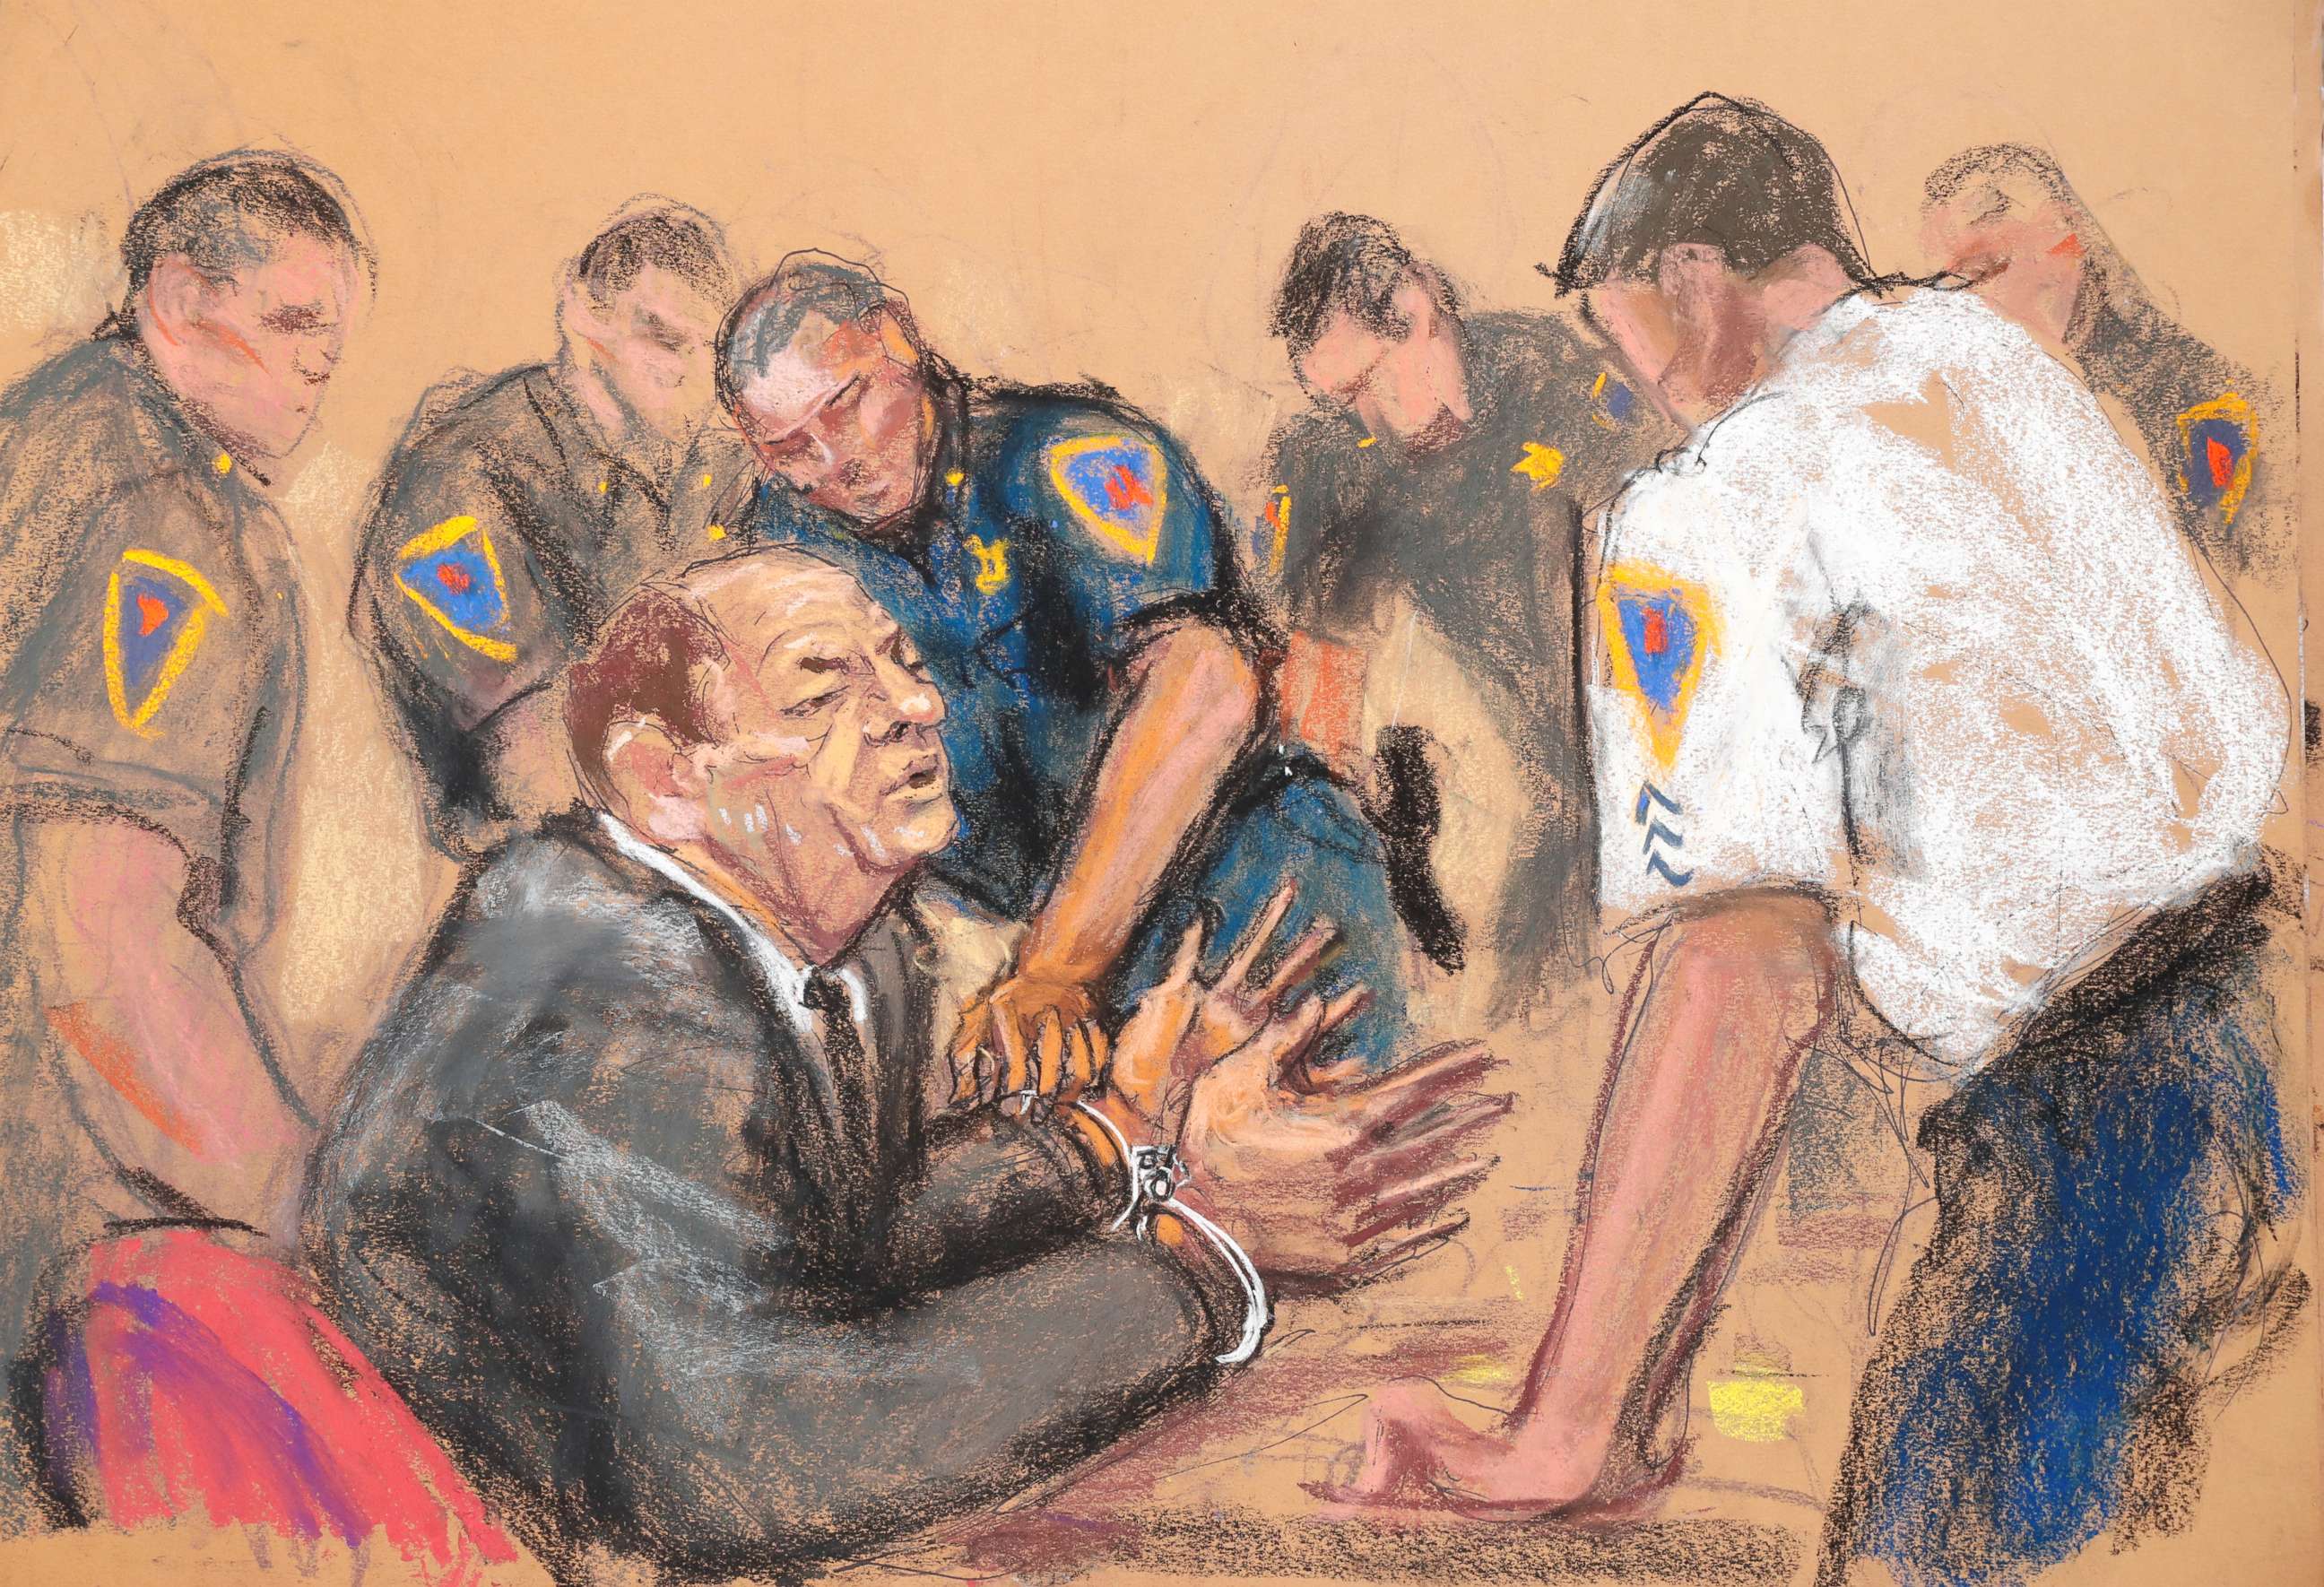 PHOTO: Film producer Harvey Weinstein is handcuffed after his guilty verdict in his sexual assault trial at the New York Criminal Court in New York, Feb. 24, 2020 in this courtroom sketch.